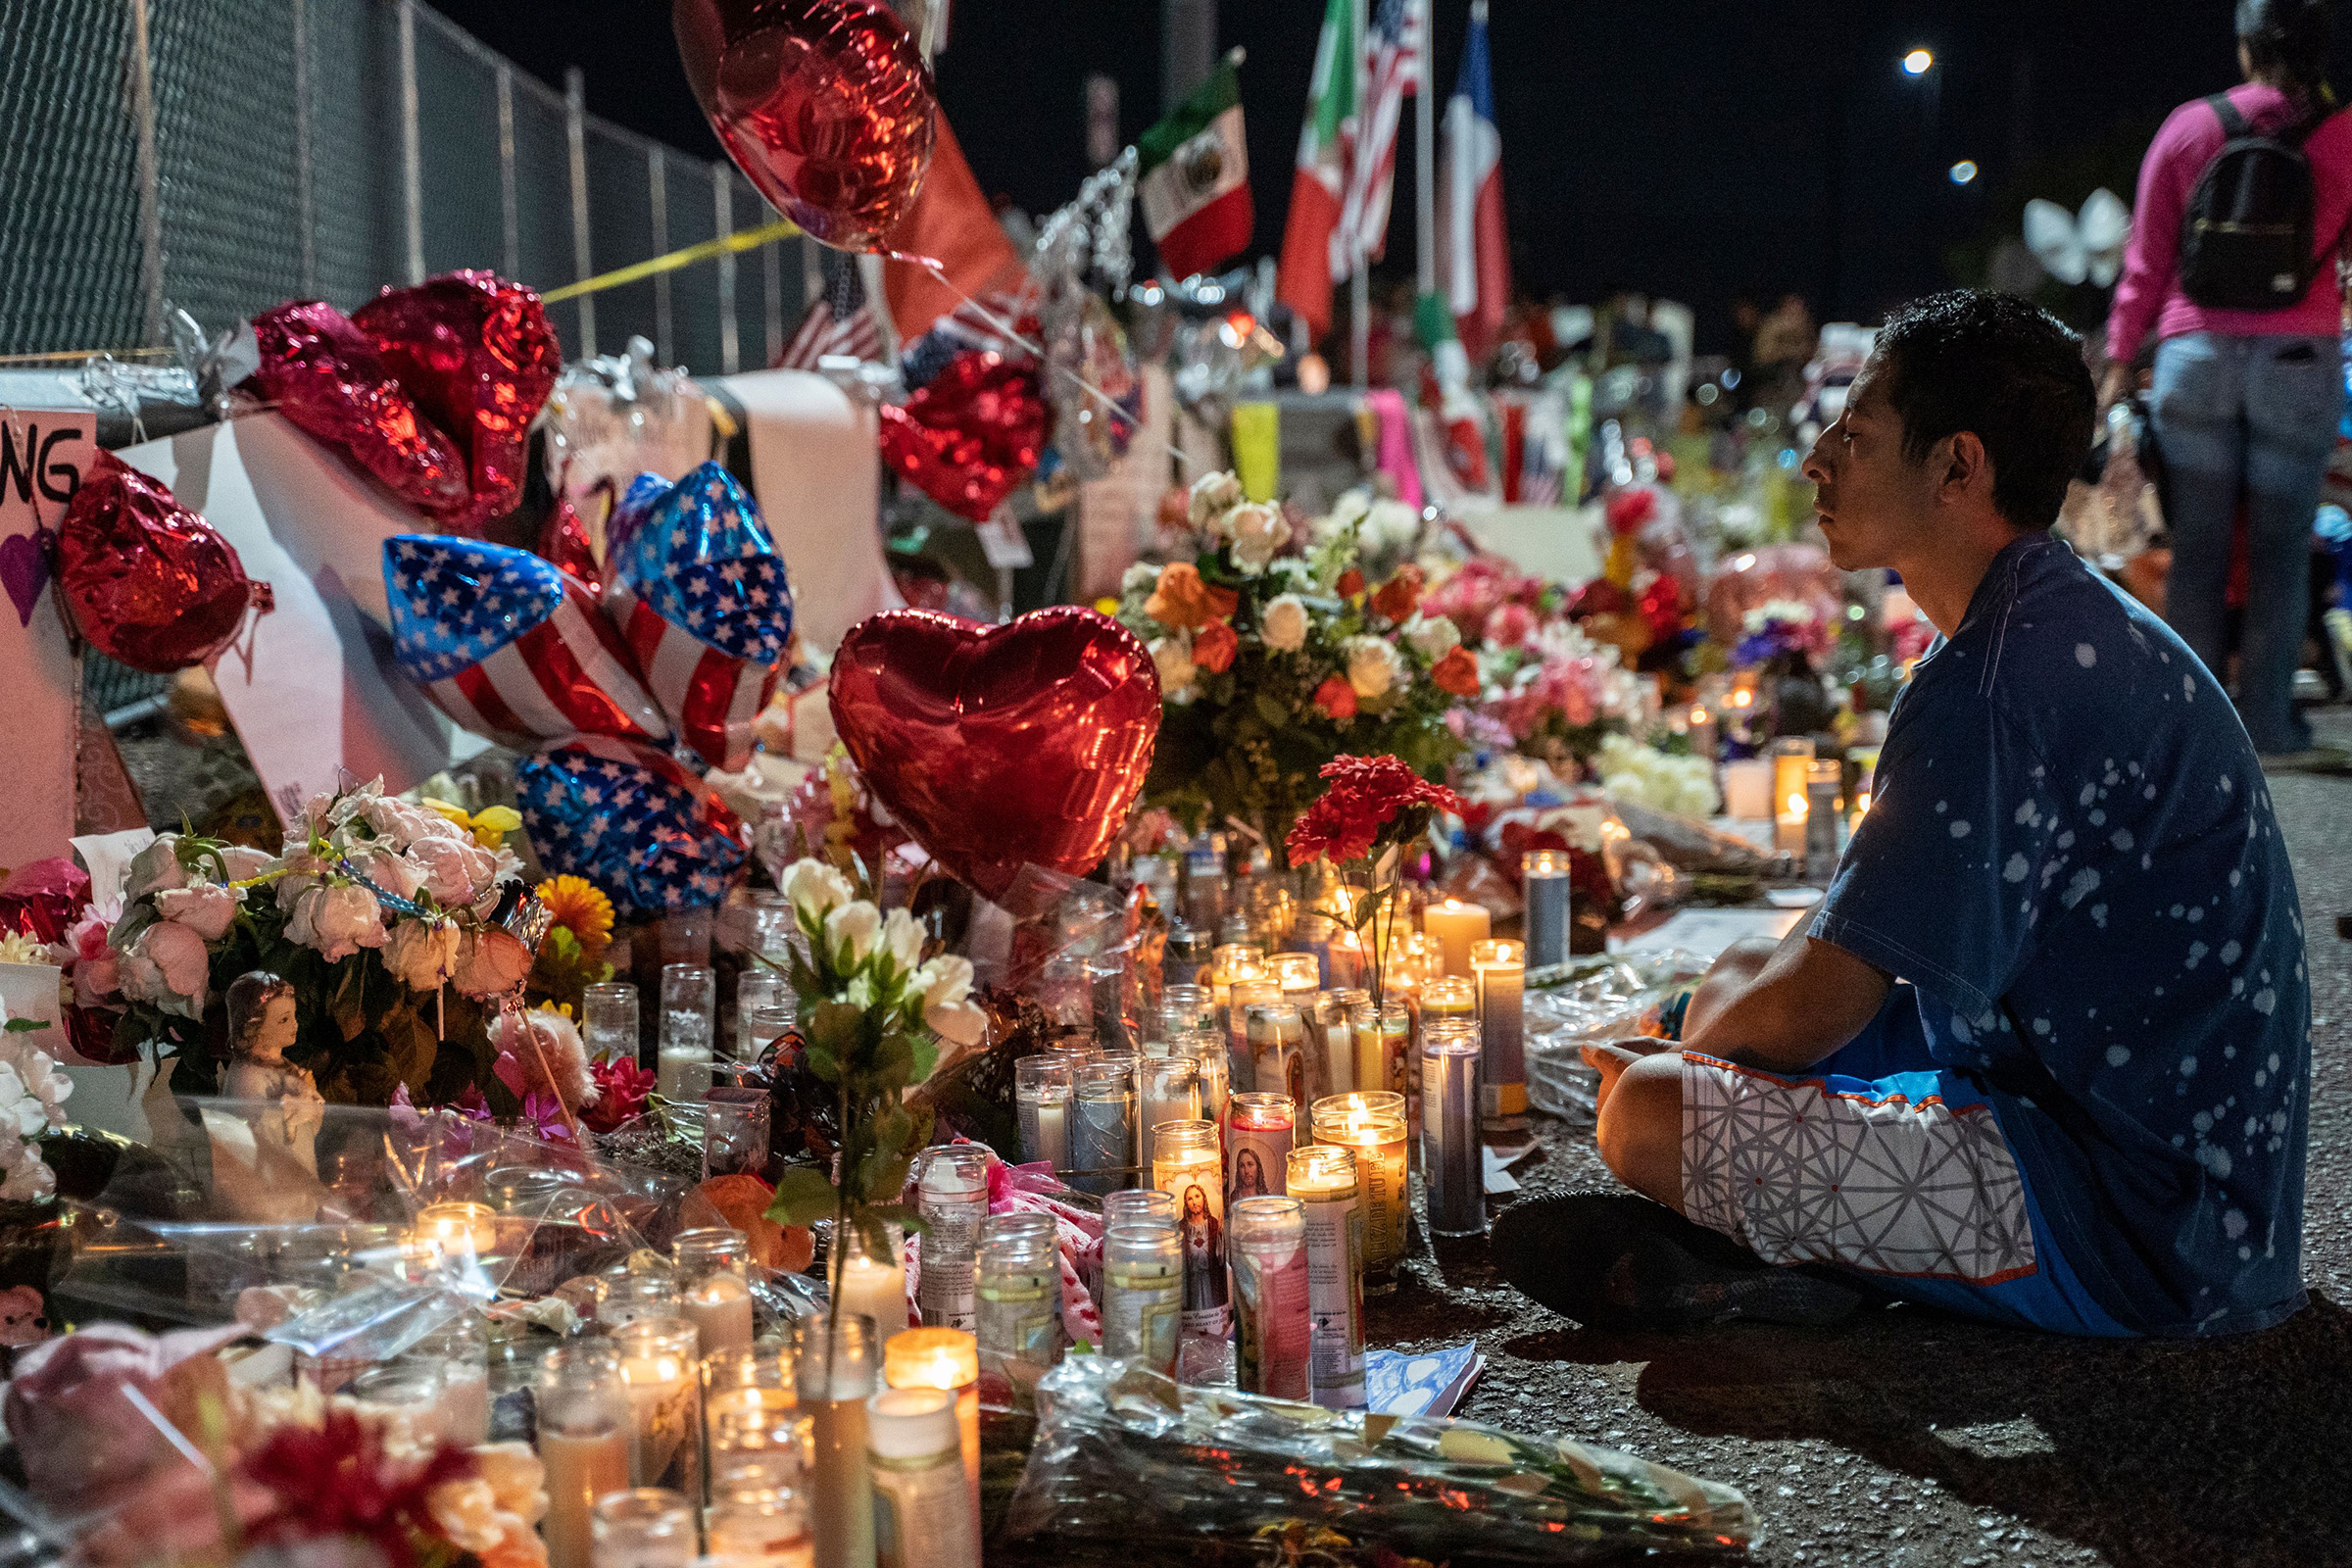 Abel Valenzuela meditates in front of the makeshift memorial for shooting victims at the Cielo Vista Mall Walmart in El Paso, Texas on August 8, 2019. (Paul Ratje—AFP via Getty Images)